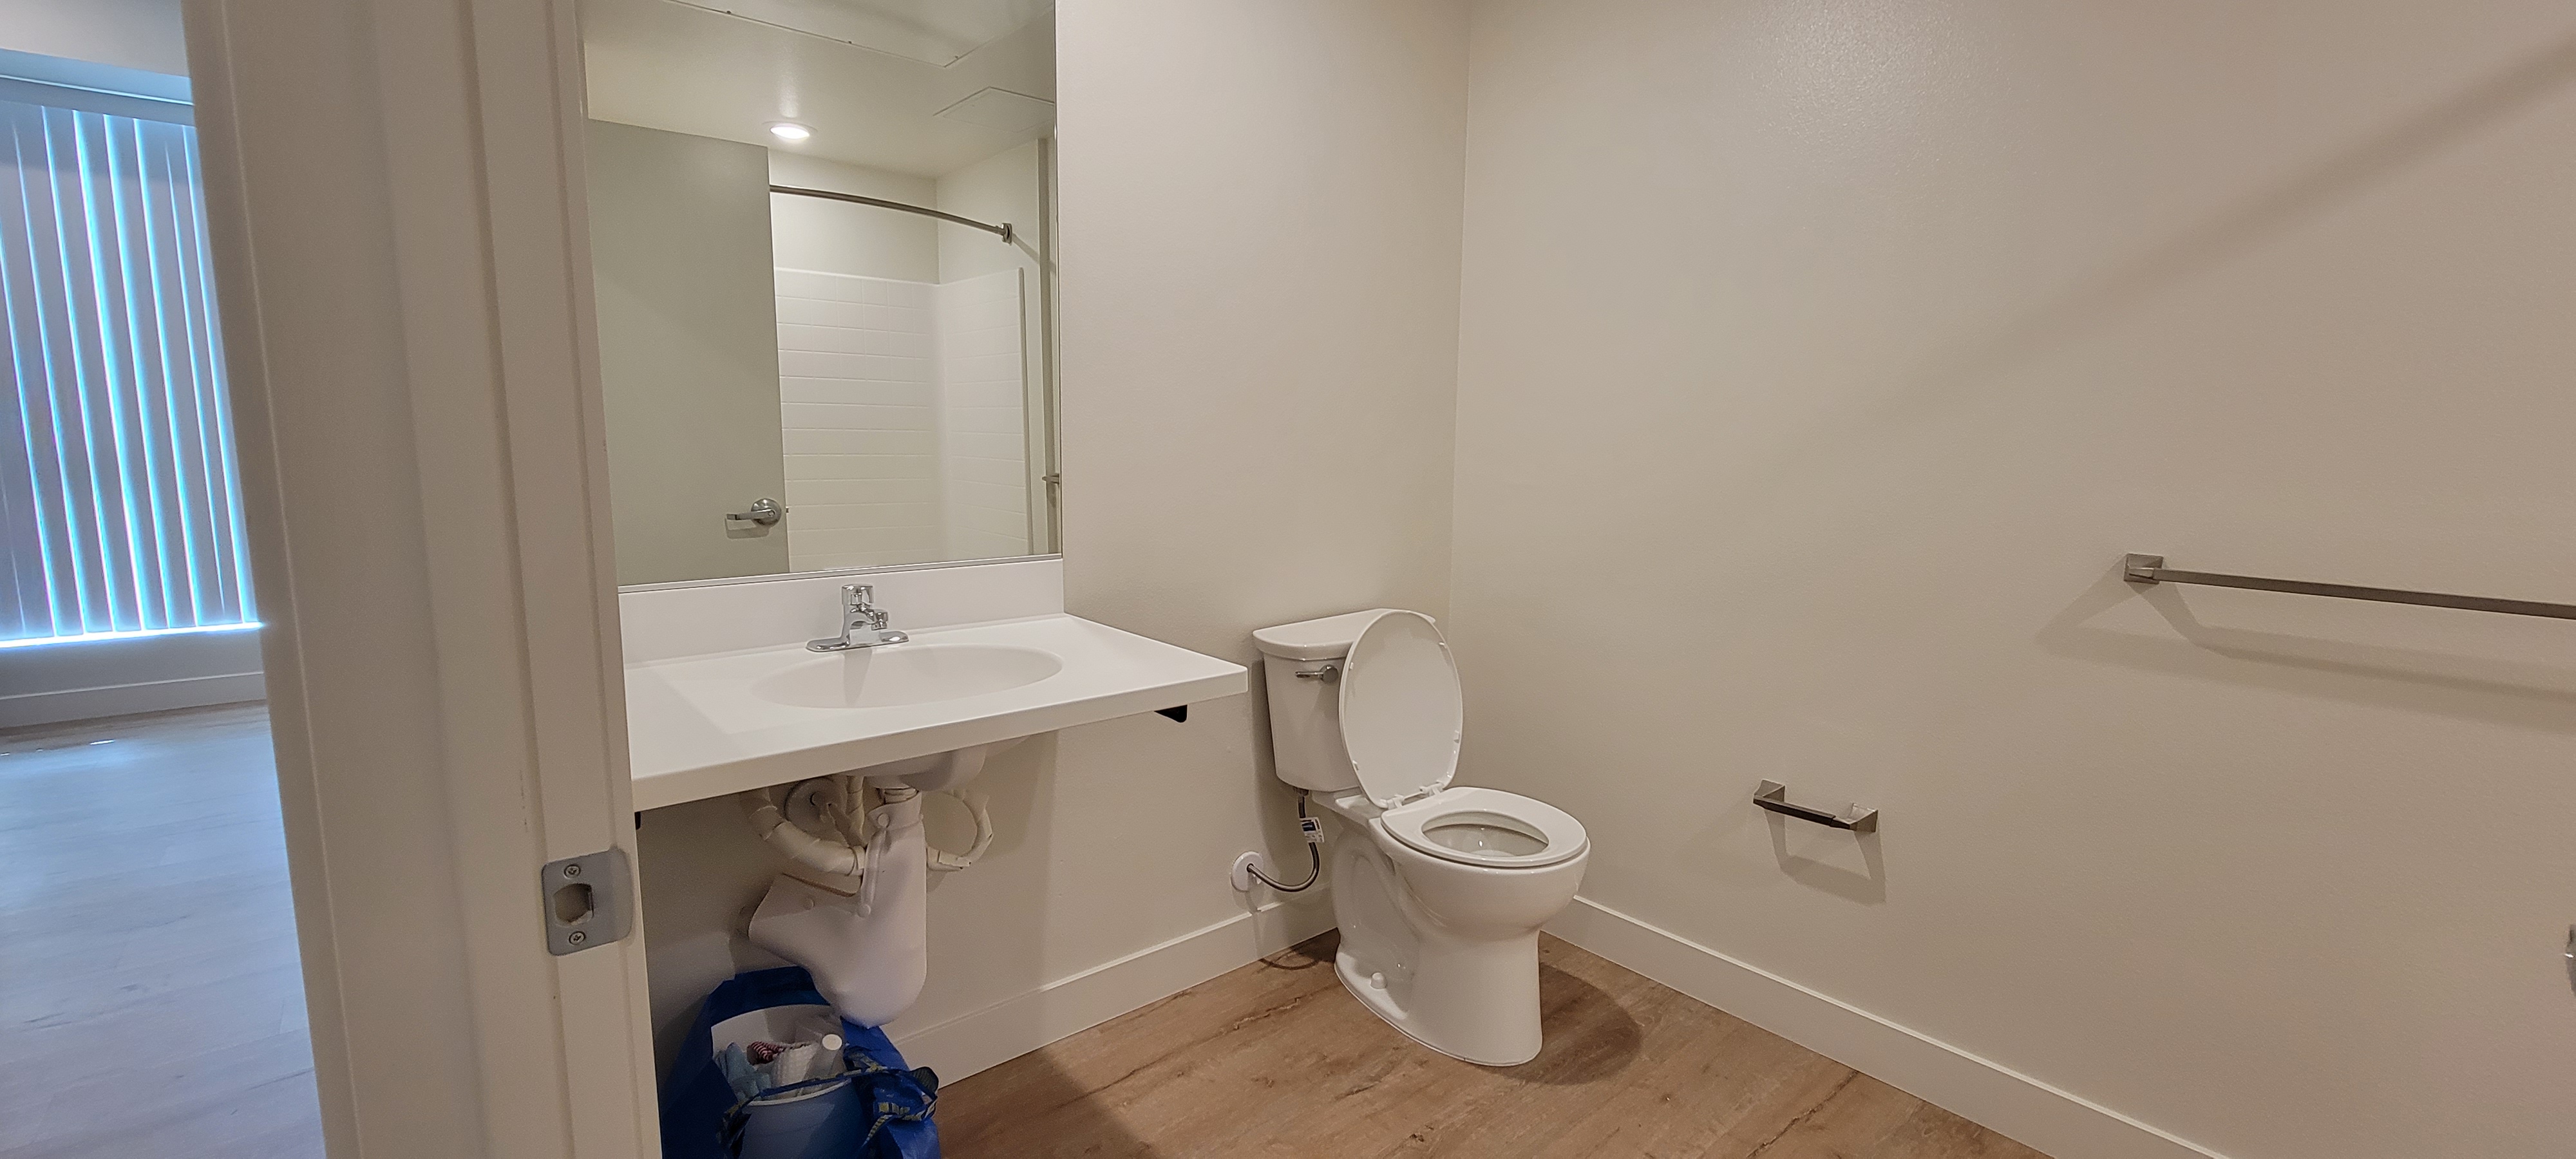 Inside view of the bathroom with toilet, wheelchair accessible sink, and mirror.